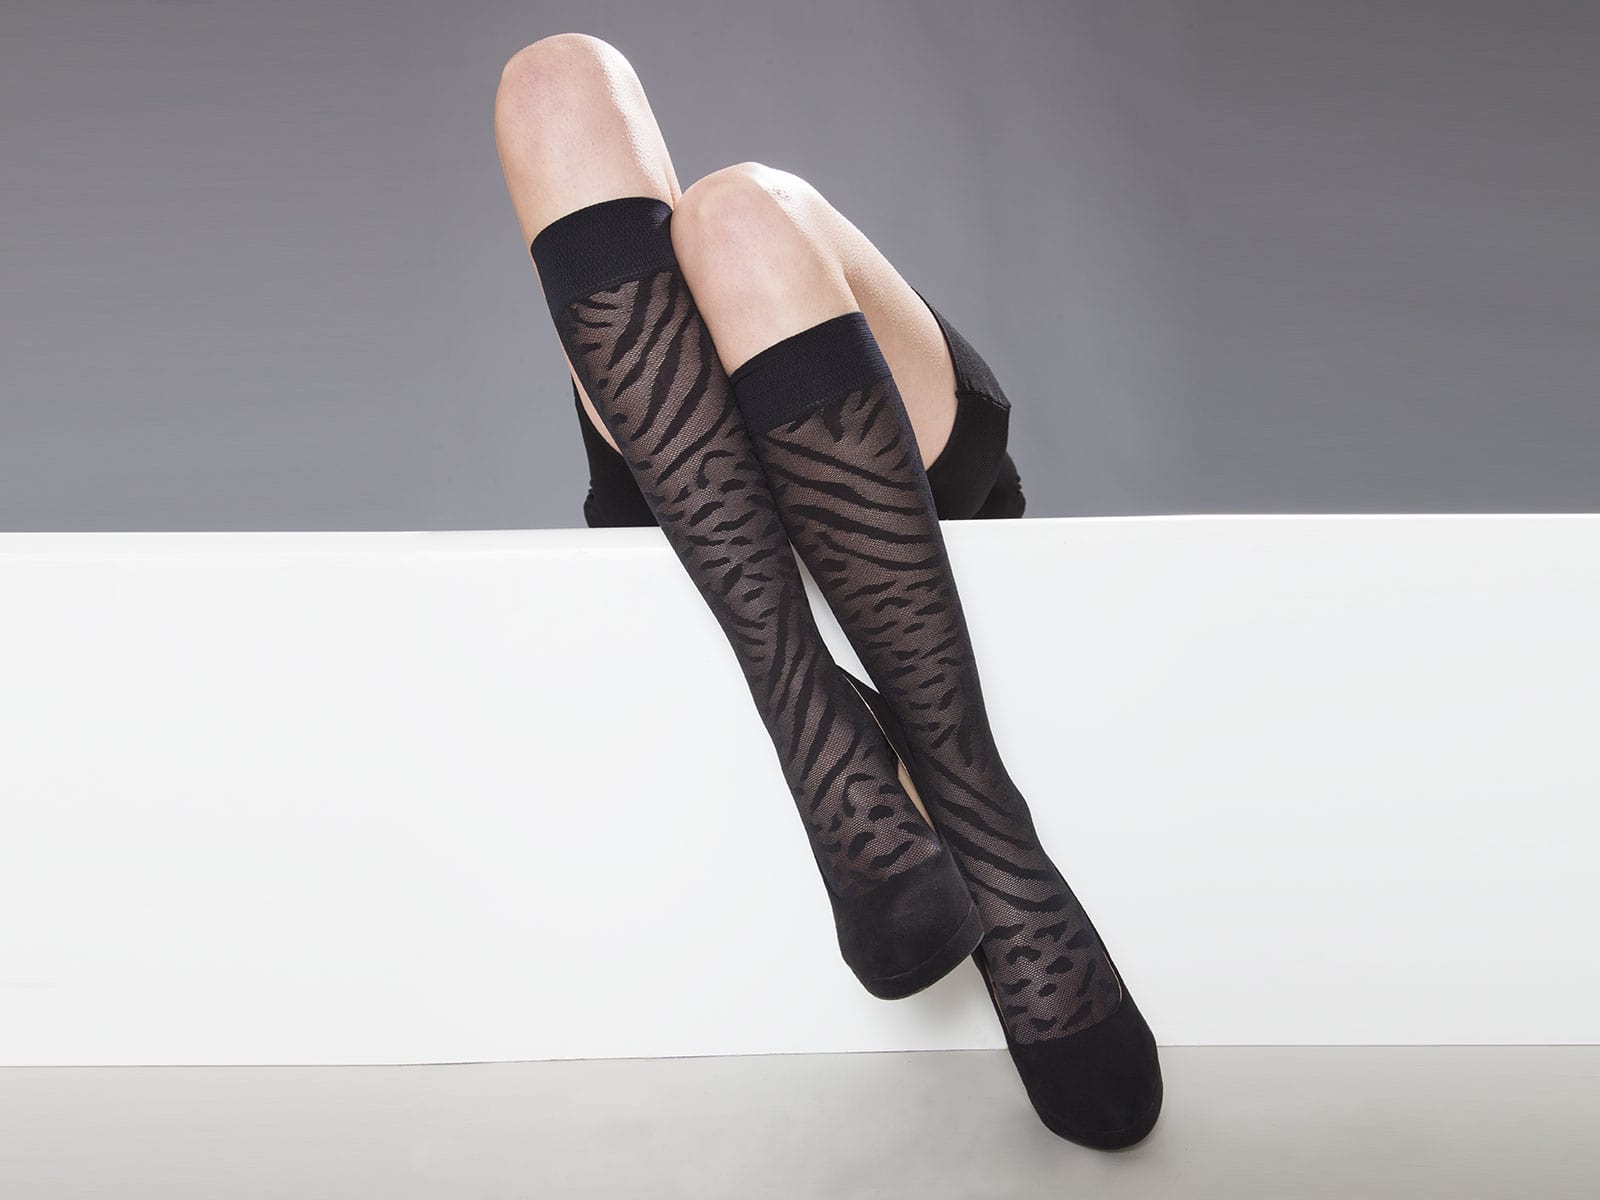 Solidea elastic stockings: beauty and effectiveness without frustration!